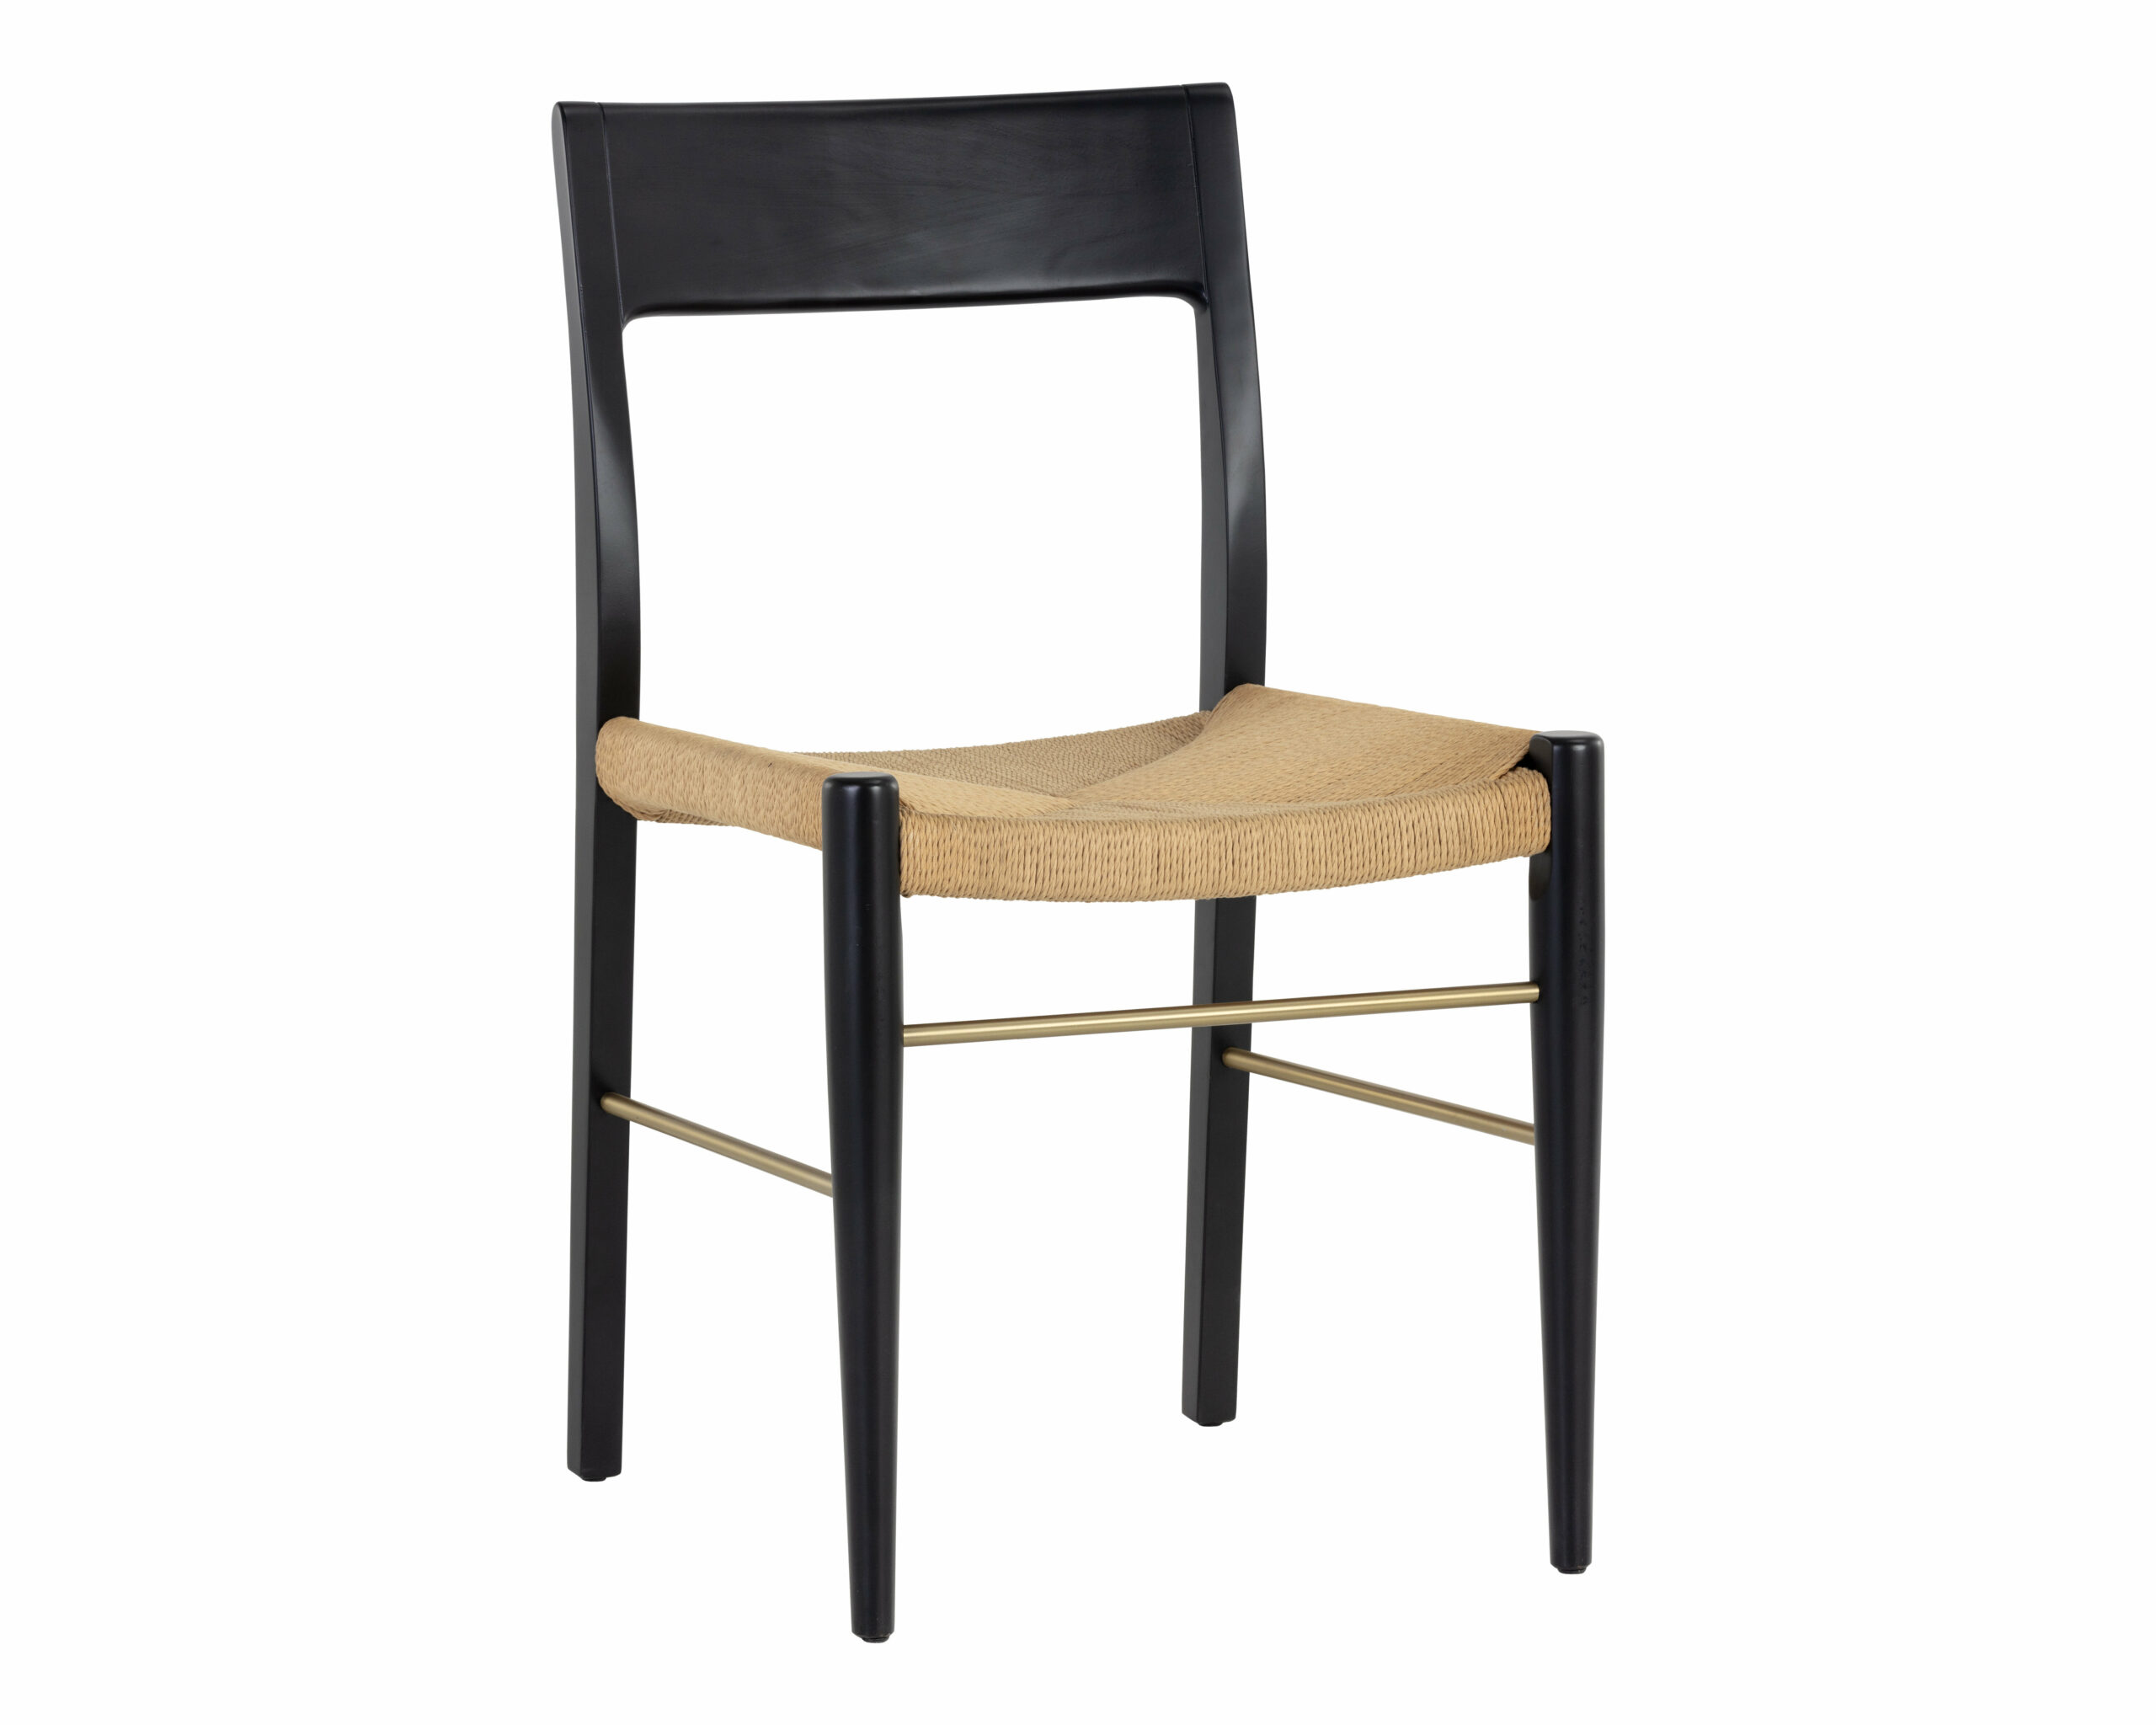 Top Wooden Chair Design Classics: Unveiled!